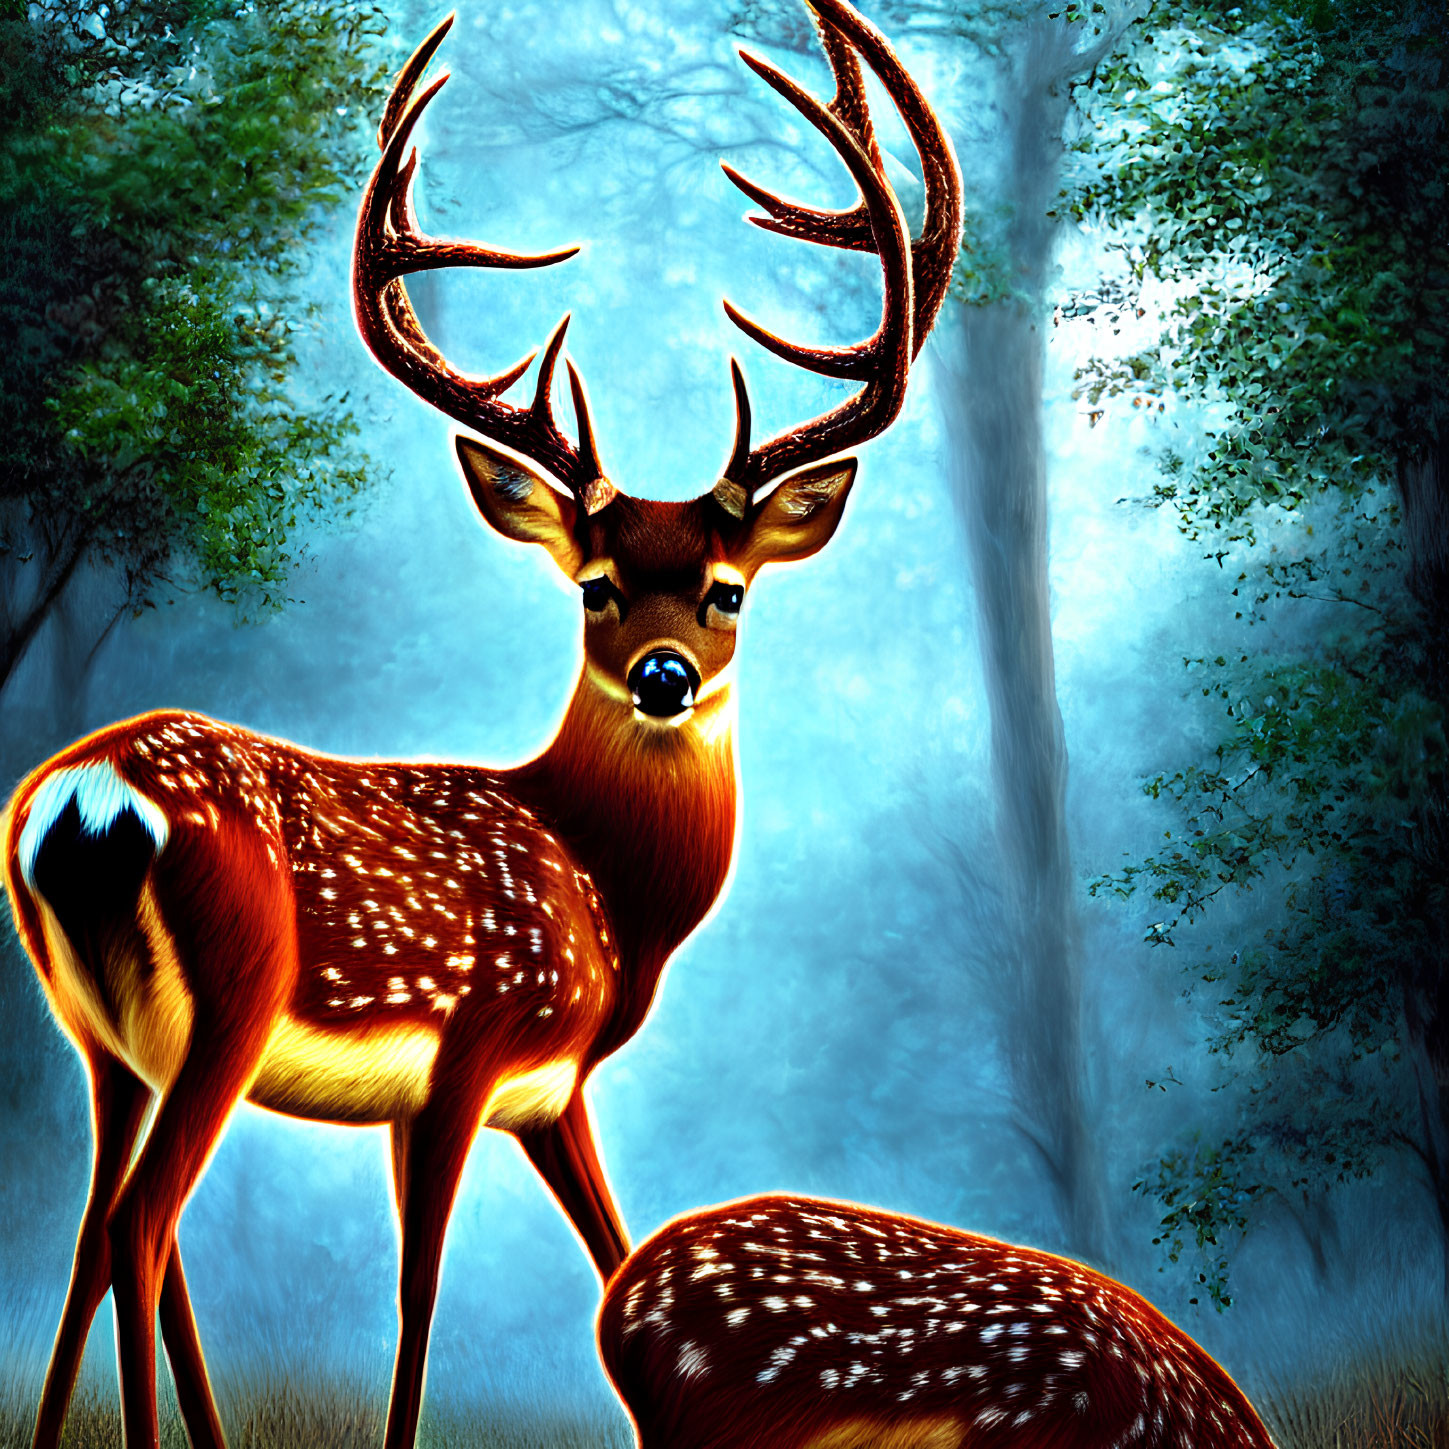 Majestic stag with large antlers in enchanted forest mist